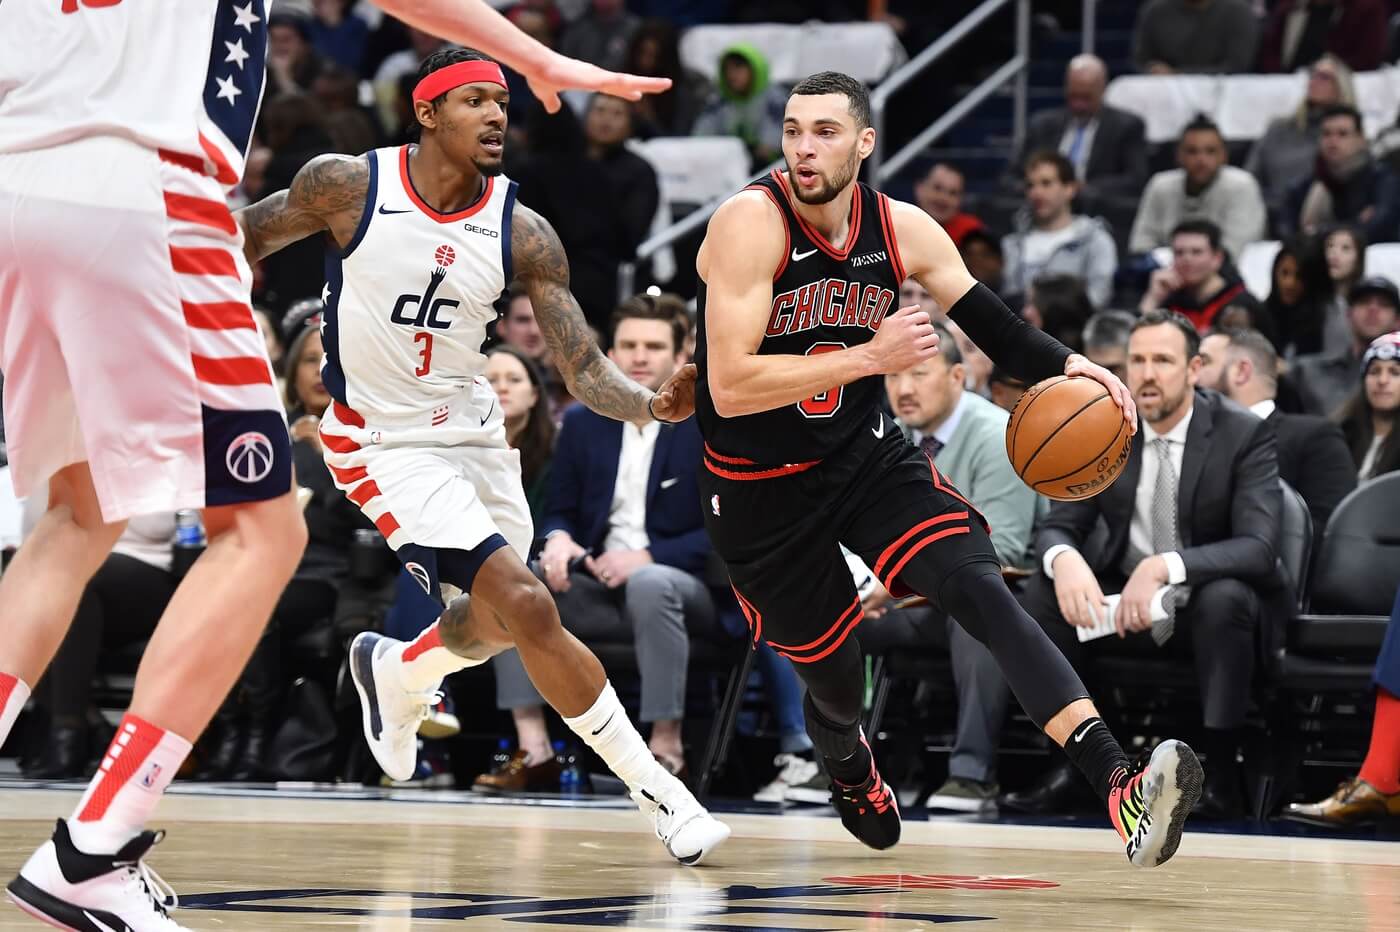 Dec 18, 2019; Washington, DC, USA; Chicago Bulls guard Zach LaVine (8) dribbles the ball against Washington Wizards guard Bradley Beal (3) during the first half at Capital One Arena. Mandatory Credit: Brad Mills-USA TODAY Sports